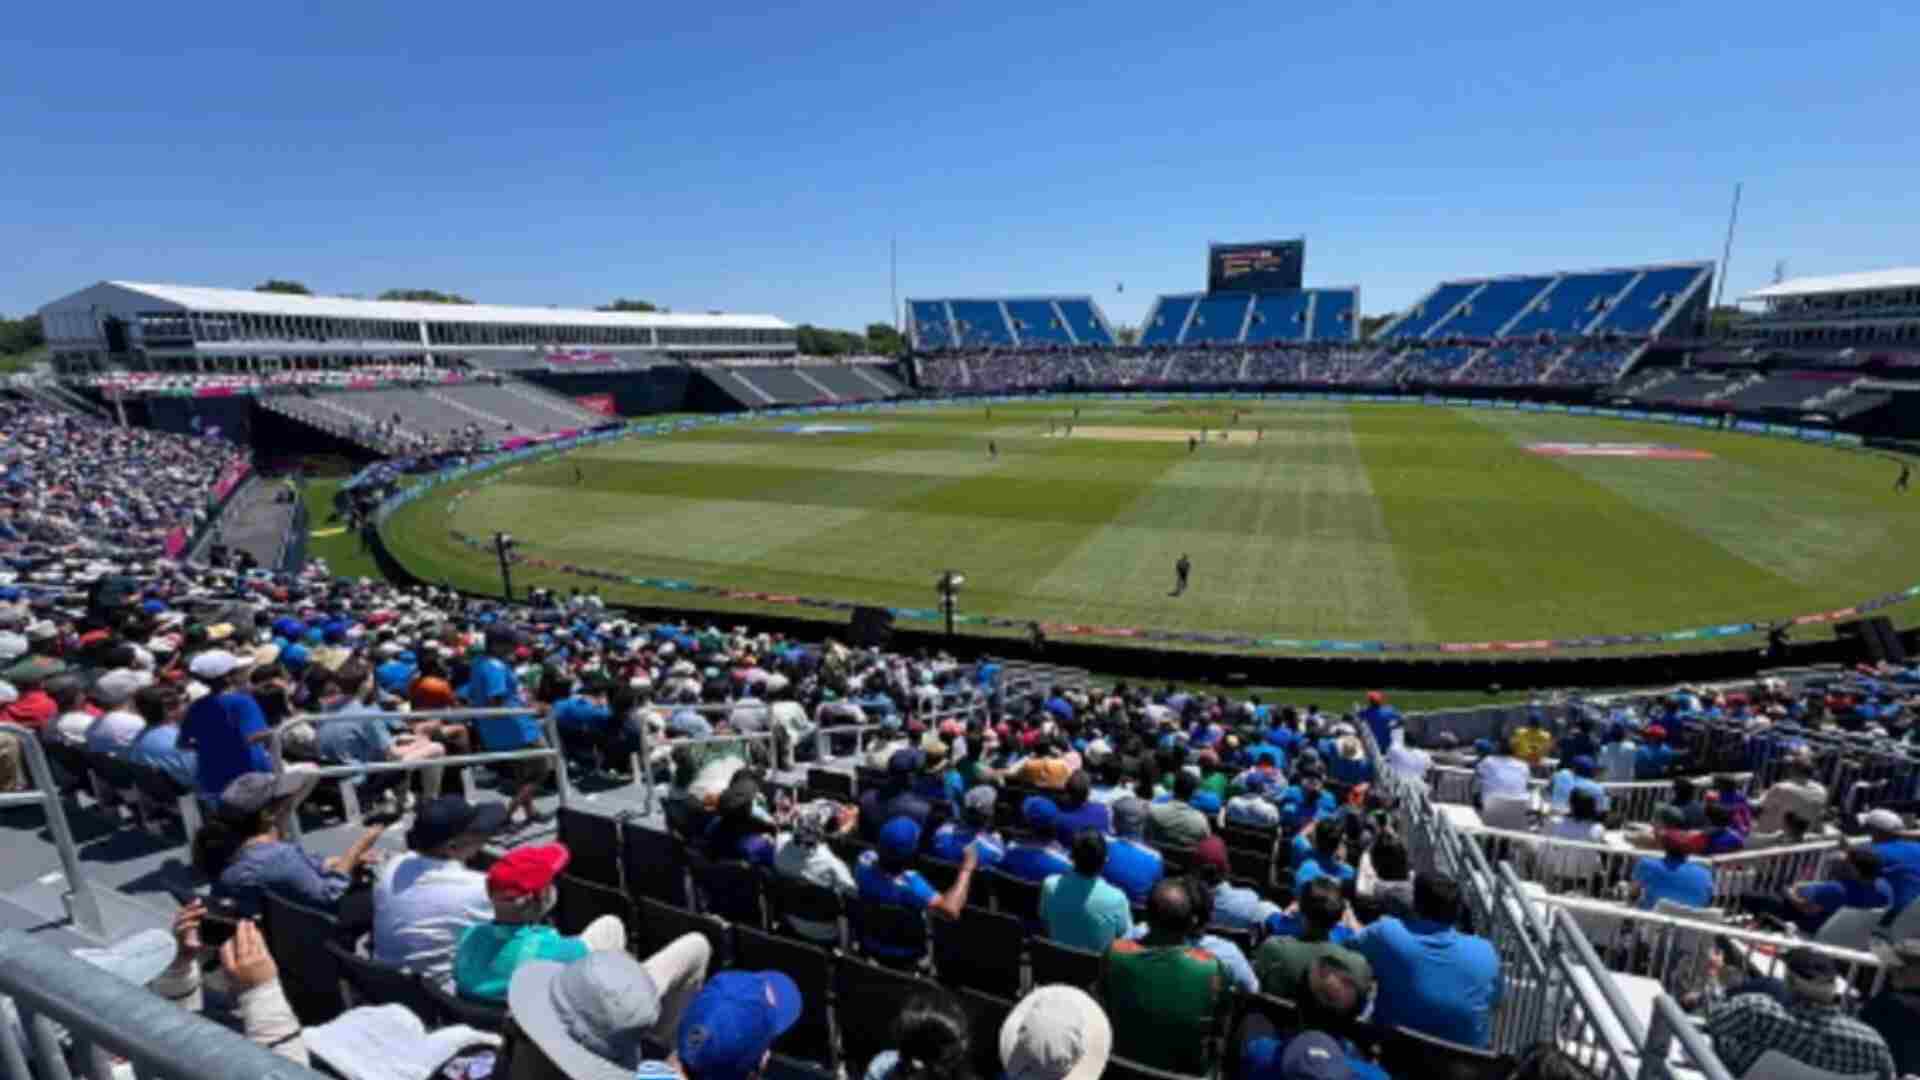 India vs Pakistan T20 World Cup Match In NY, Weather Forecast Predicts 'Intermittent Clouds